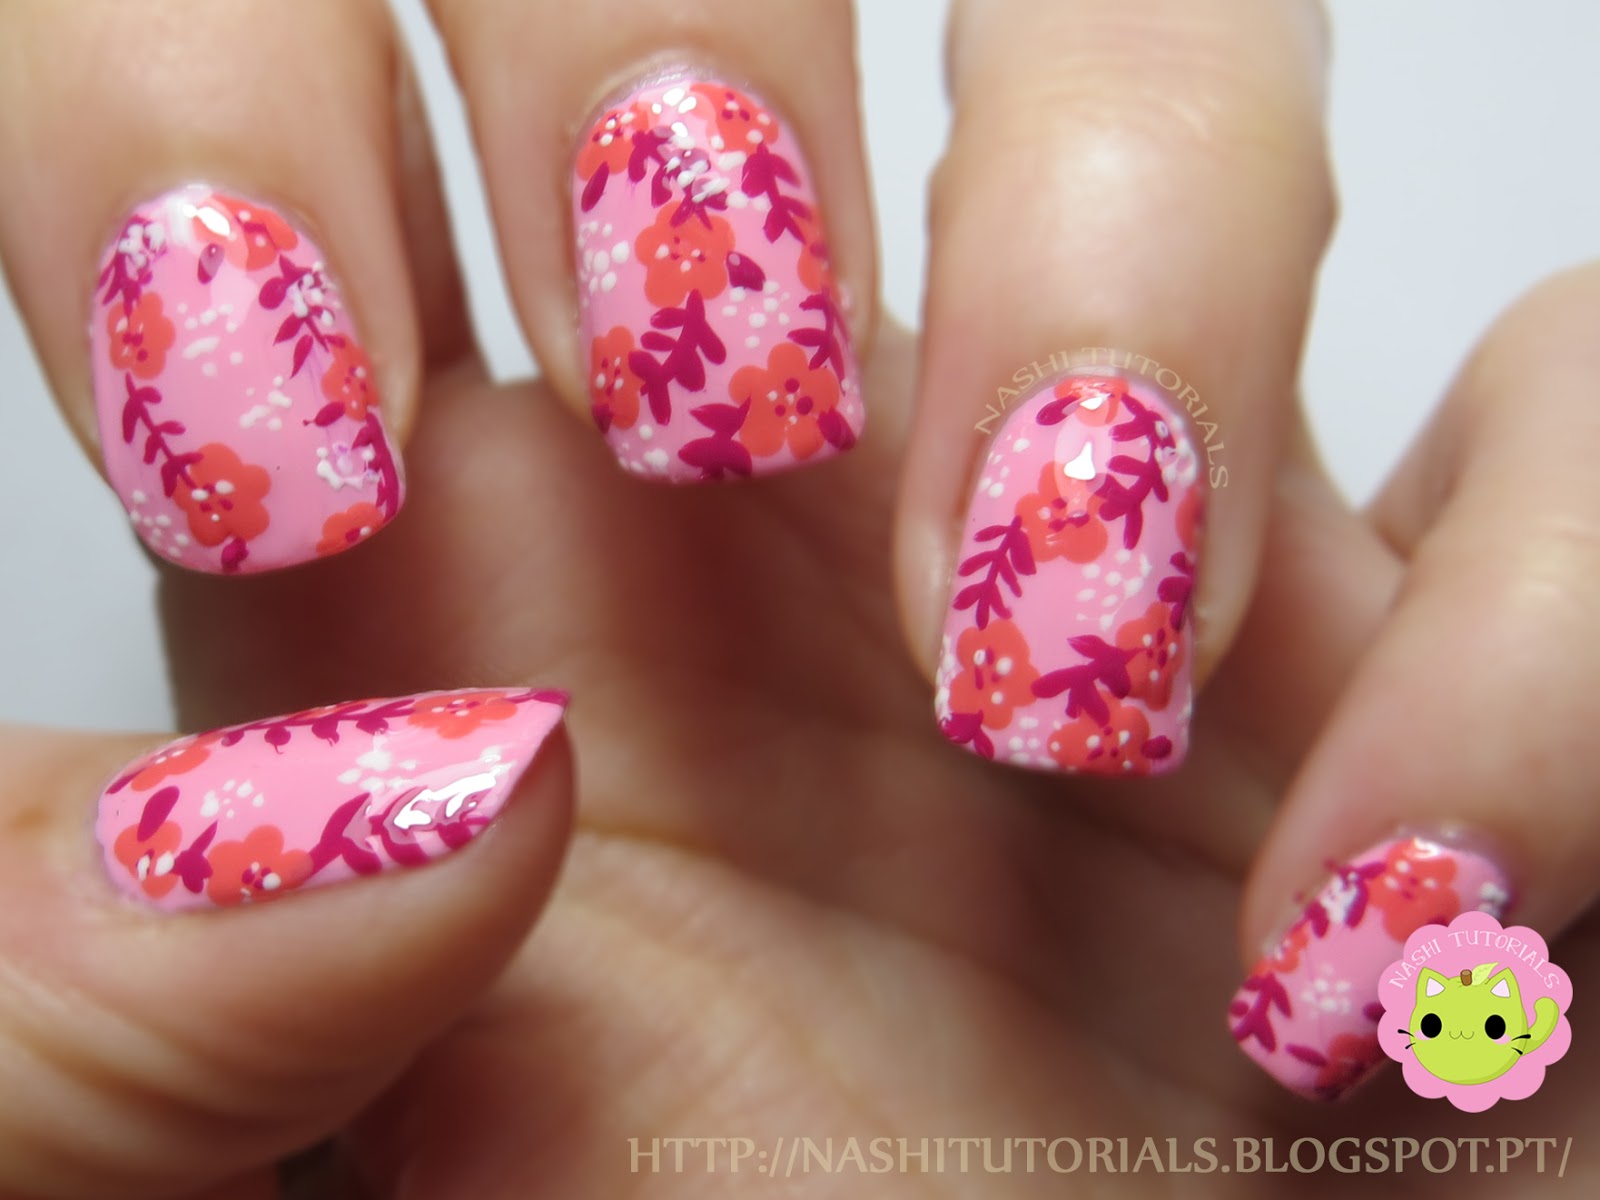 Fluorescent Pink and Floral Nail Art Tutorials - wide 5